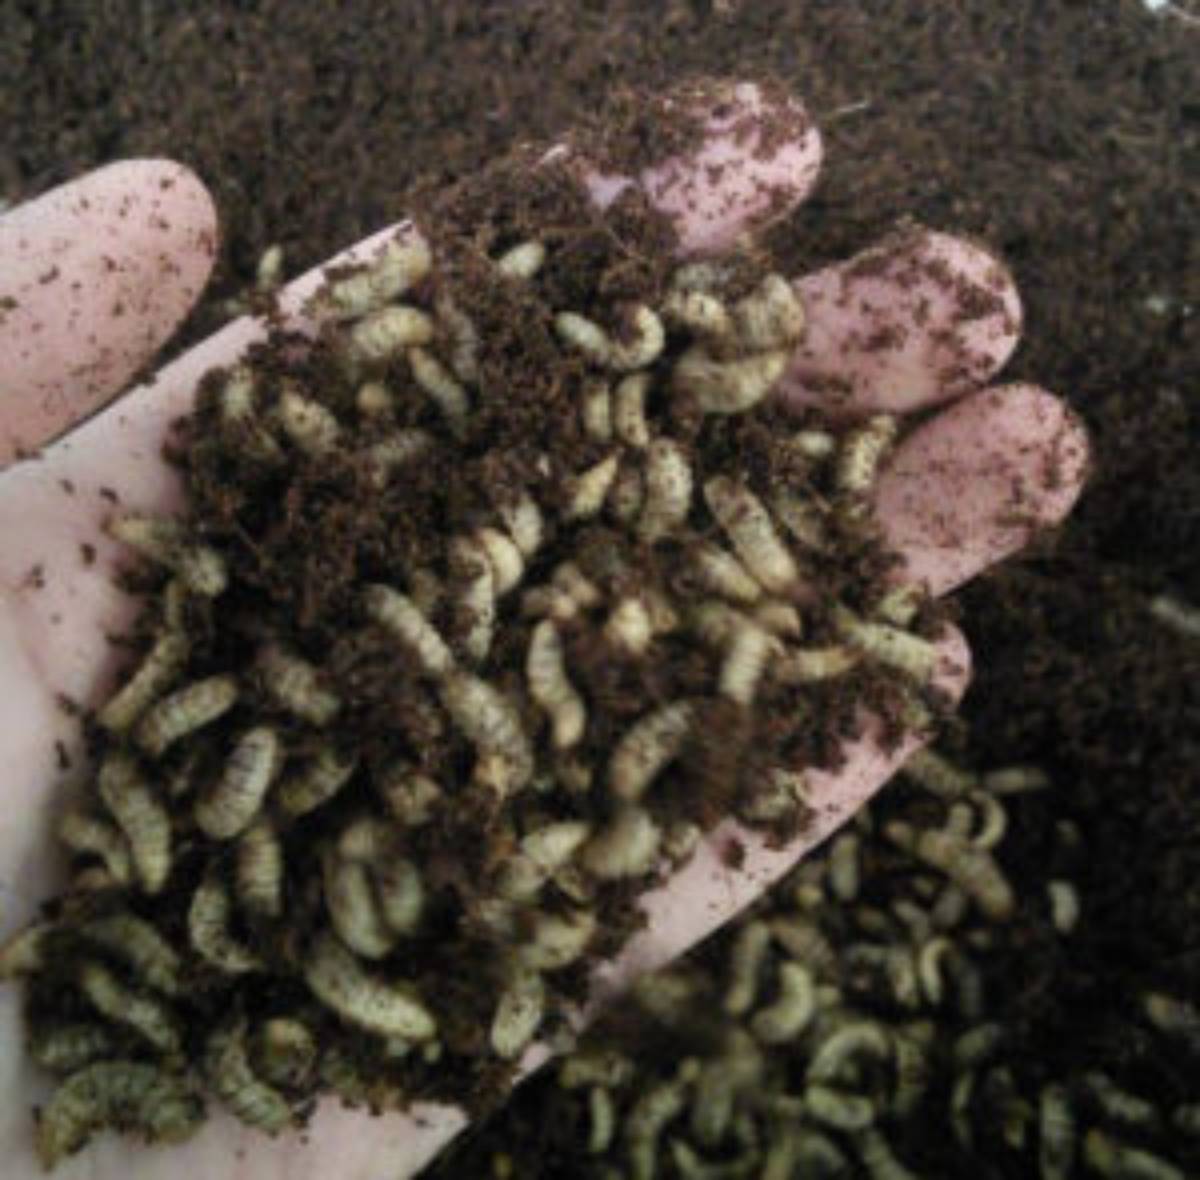 Feeder insects - black soldier fly larvae